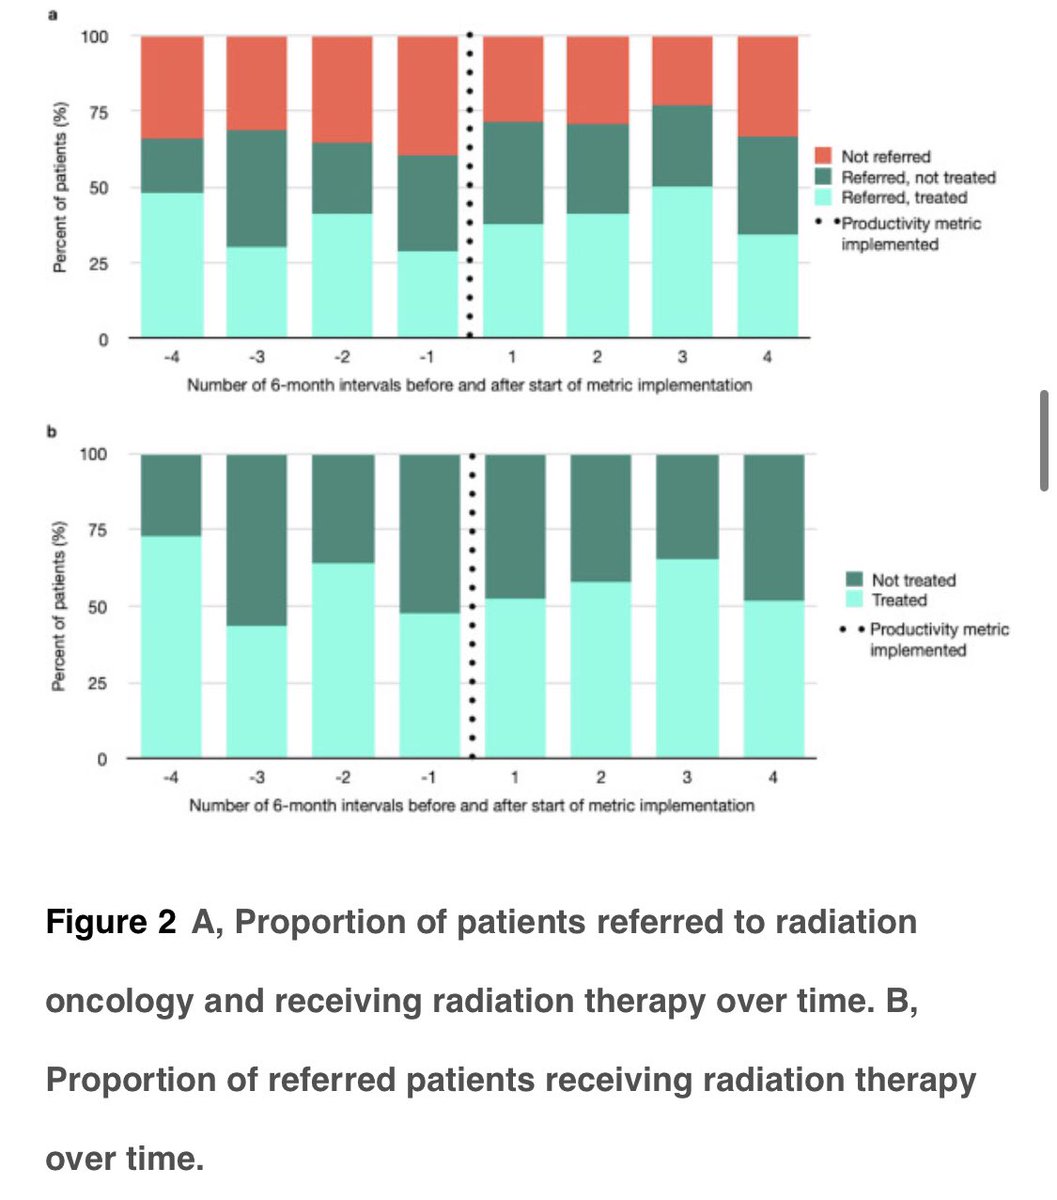 In a retrospective study across @MSK_RadOnc network, we evaluated use of RT for elderly ER+ early-stage #bcsm before/after implementing a productivity-based bonus metric and found *no change*. 

More on incentive design + central QA in #AdvancesRO 📰: advancesradonc.org/article/S2452-…